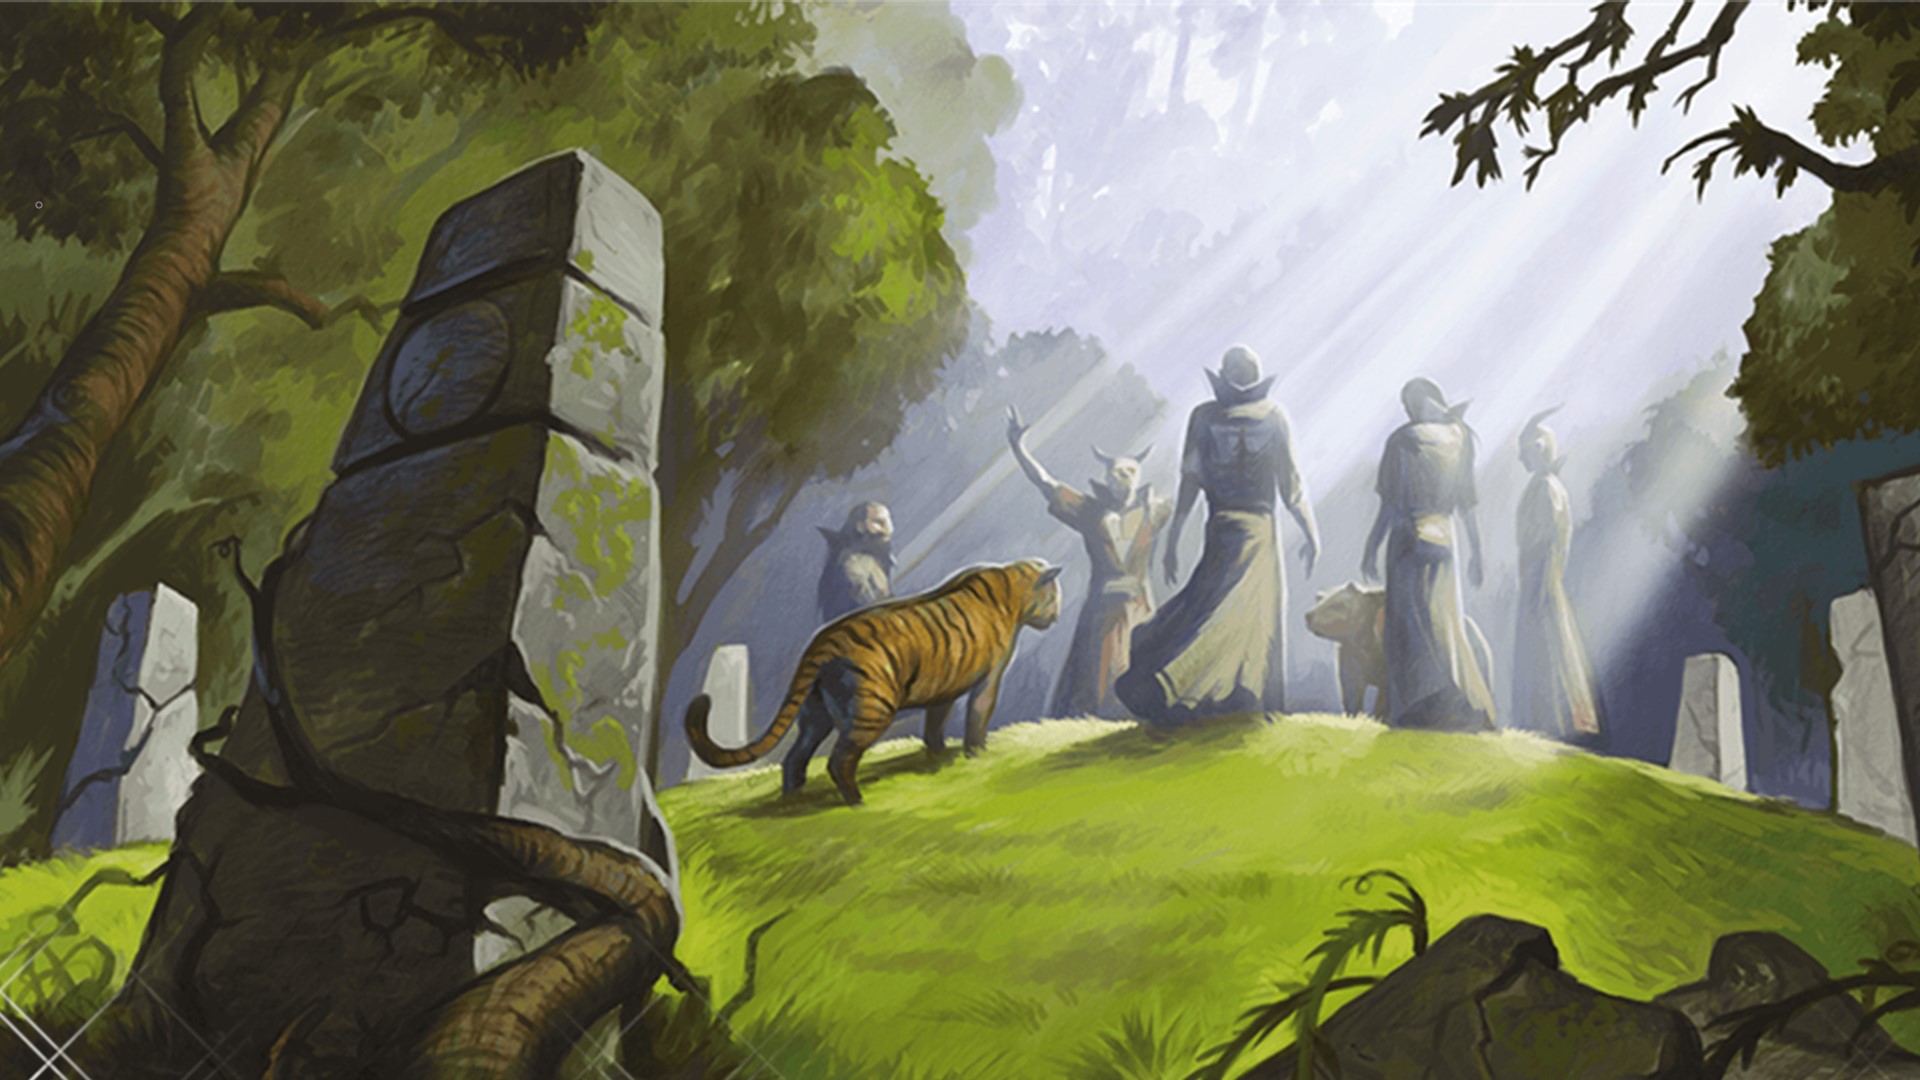 DnD Druid 5E - Wizards of the Coast artwork showing a druid circle on a hill with a tiger